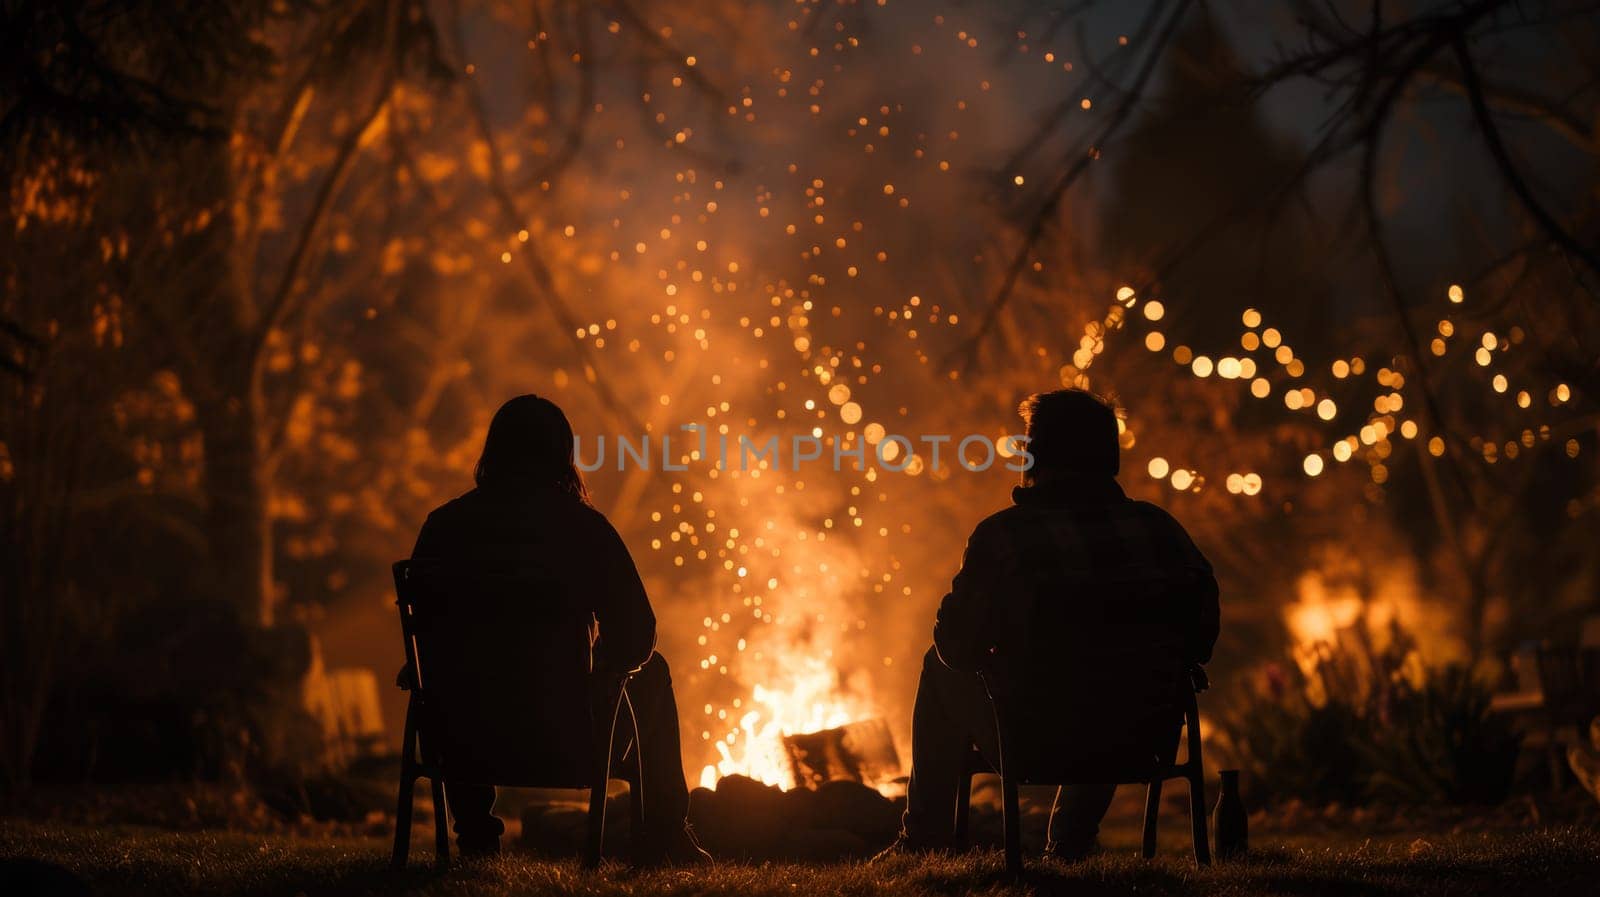 Two people sitting in chairs near a fire pit with lights